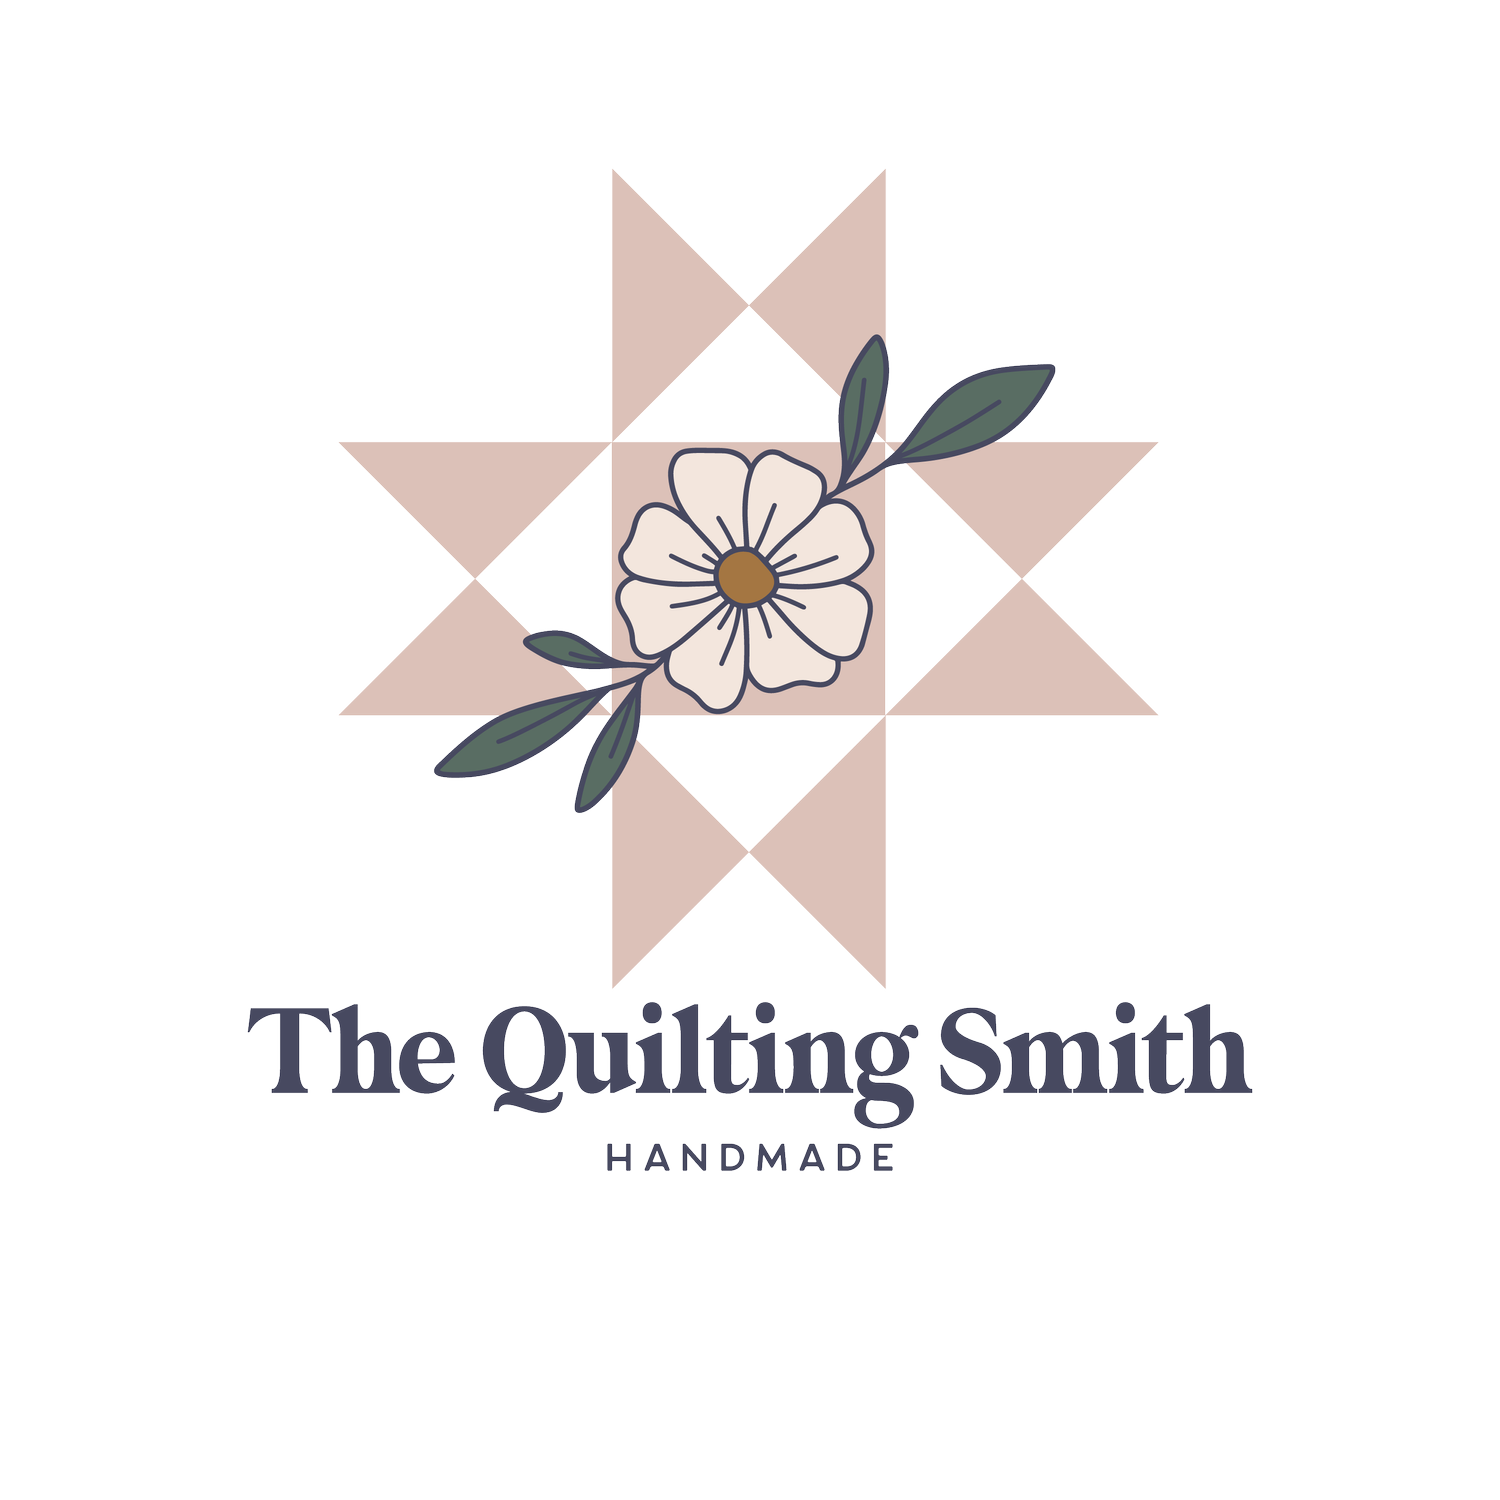 The Quilting Smith